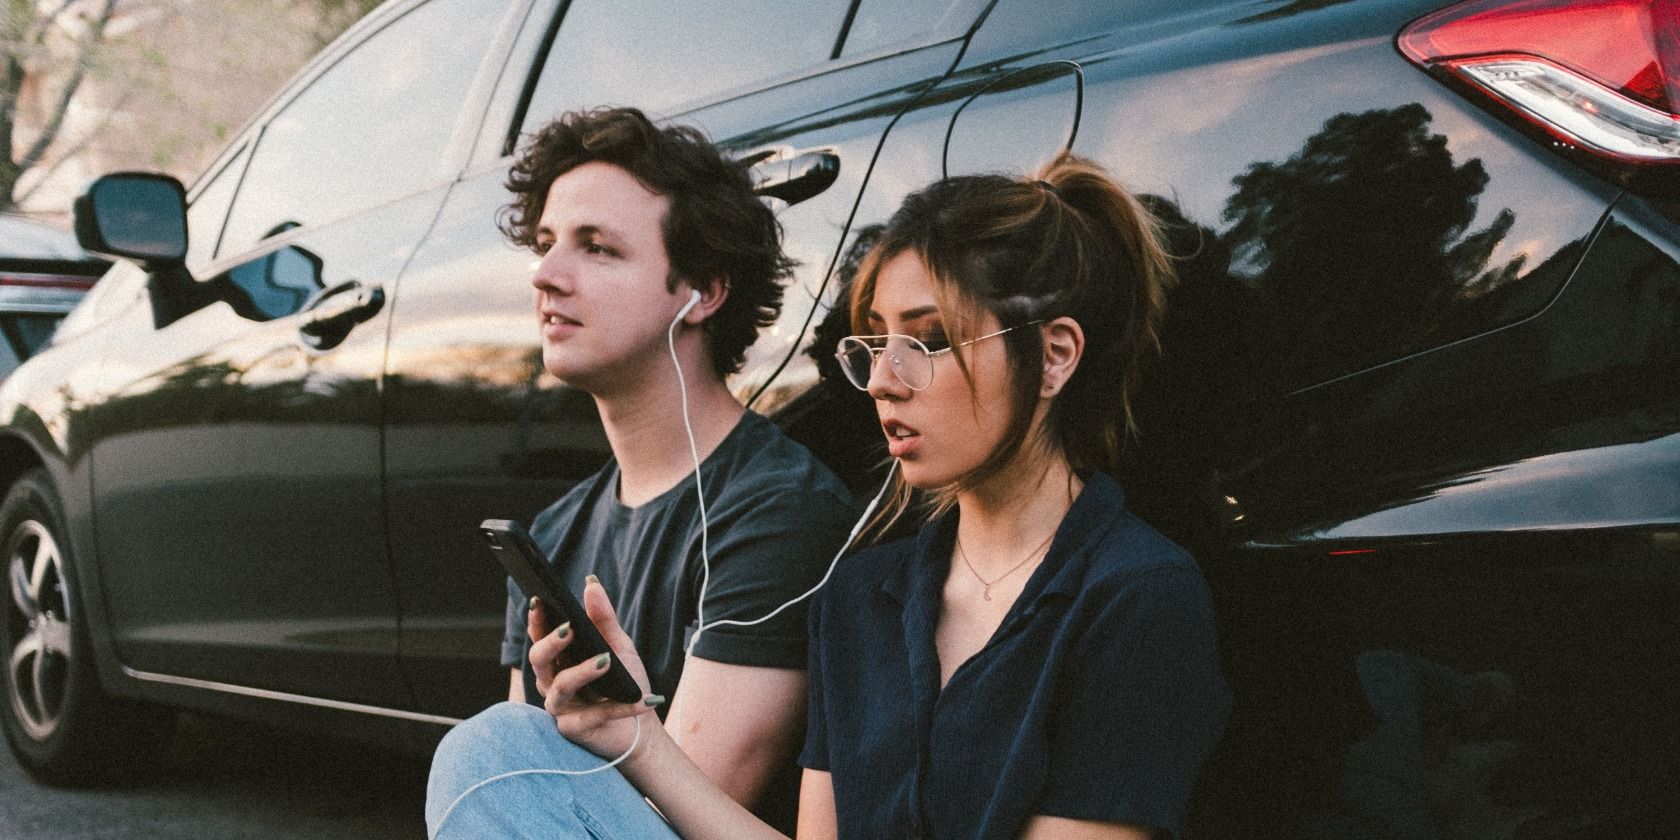 young man and woman using earphones, listening to music against a car